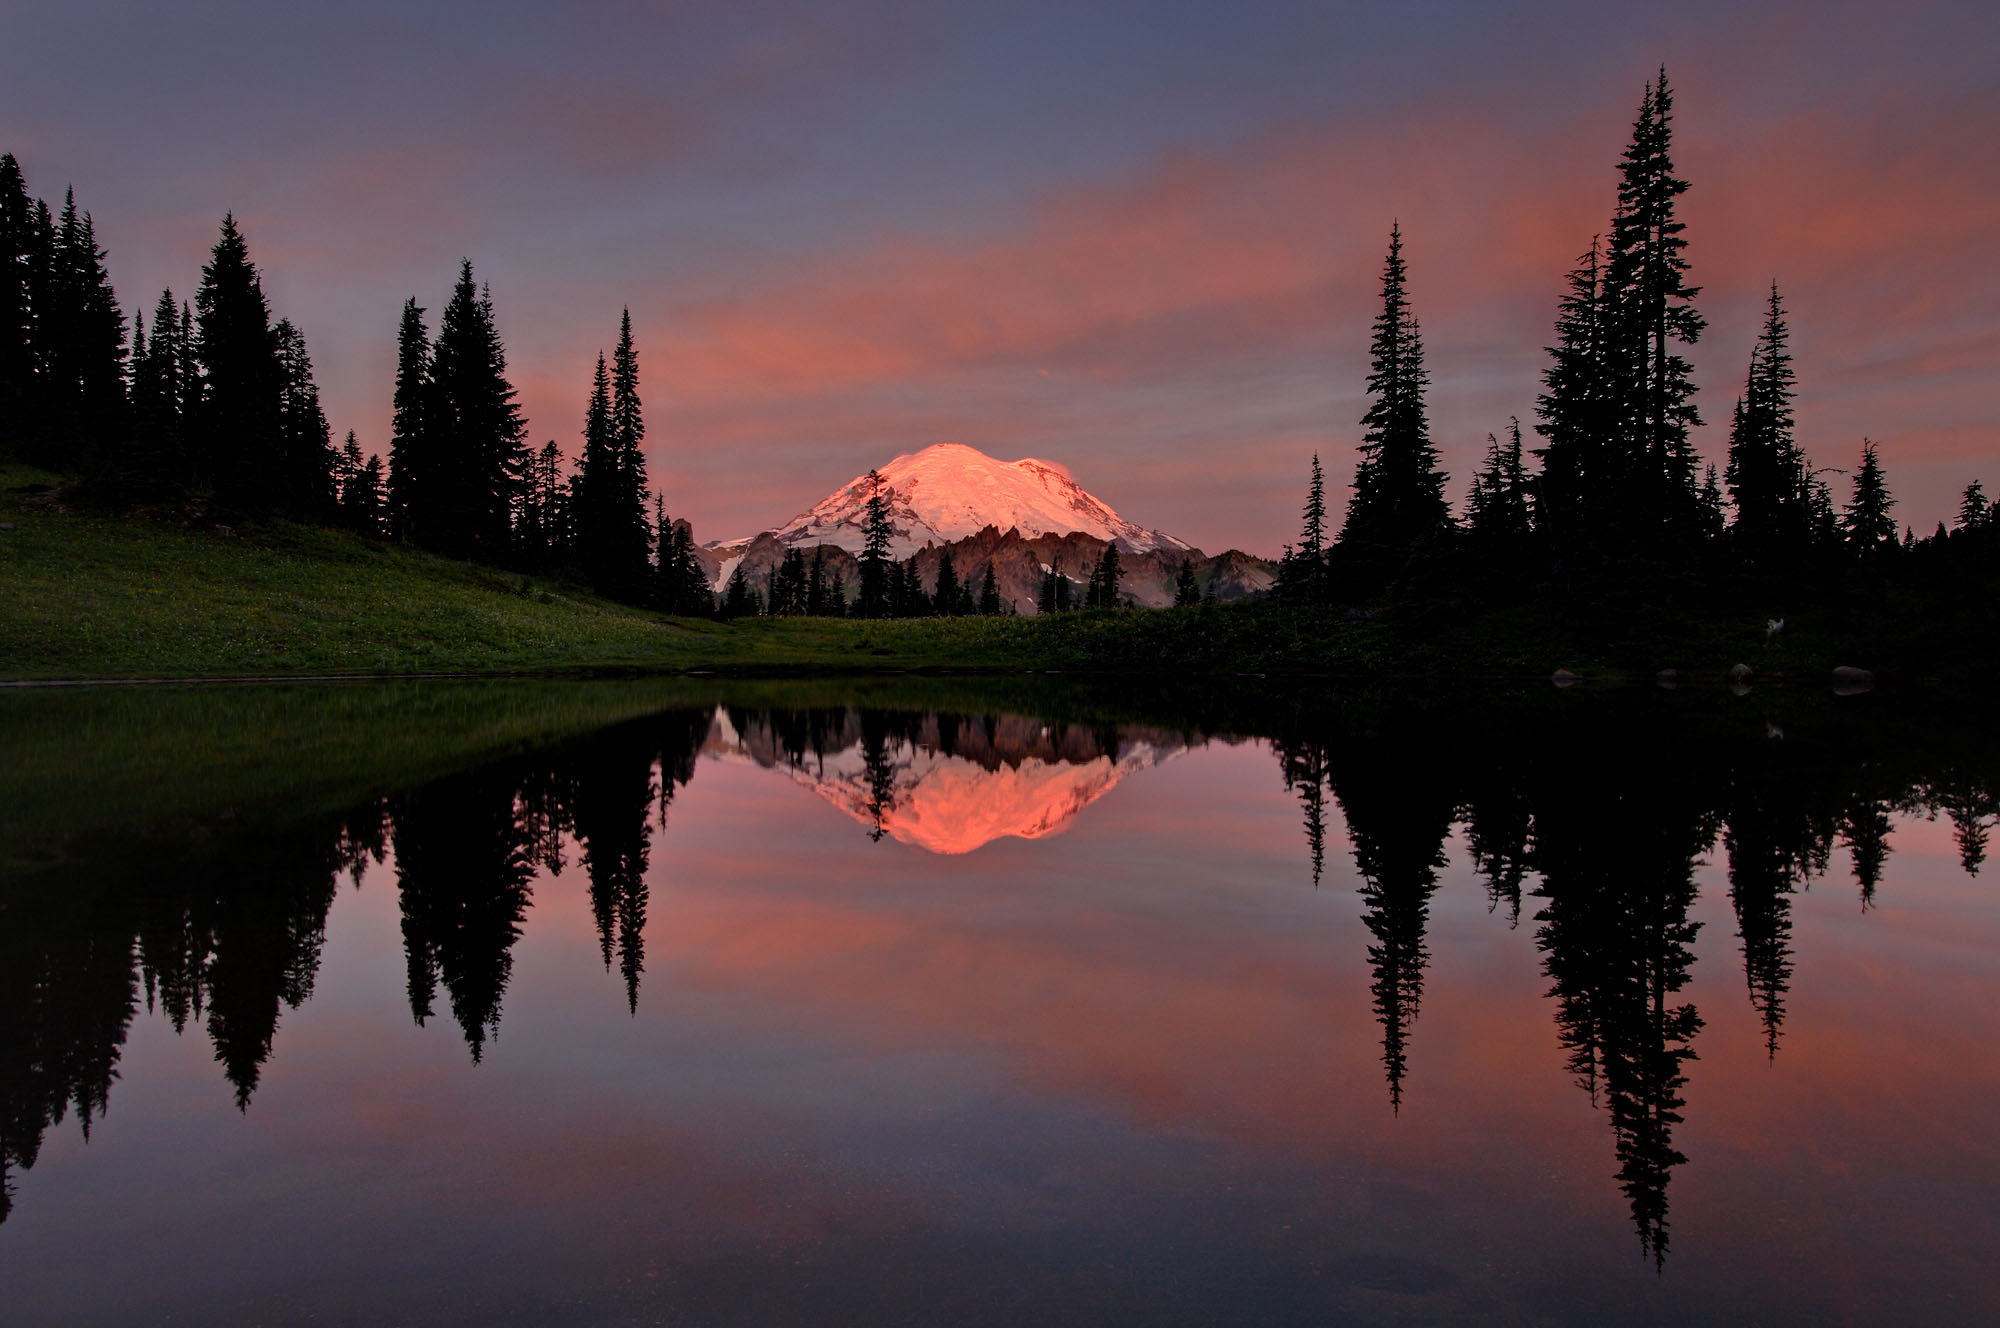 Sunrise reflection of snowcapped Mount Rainier with trees and clouds in Tipsoo Lake at Chinook Pass